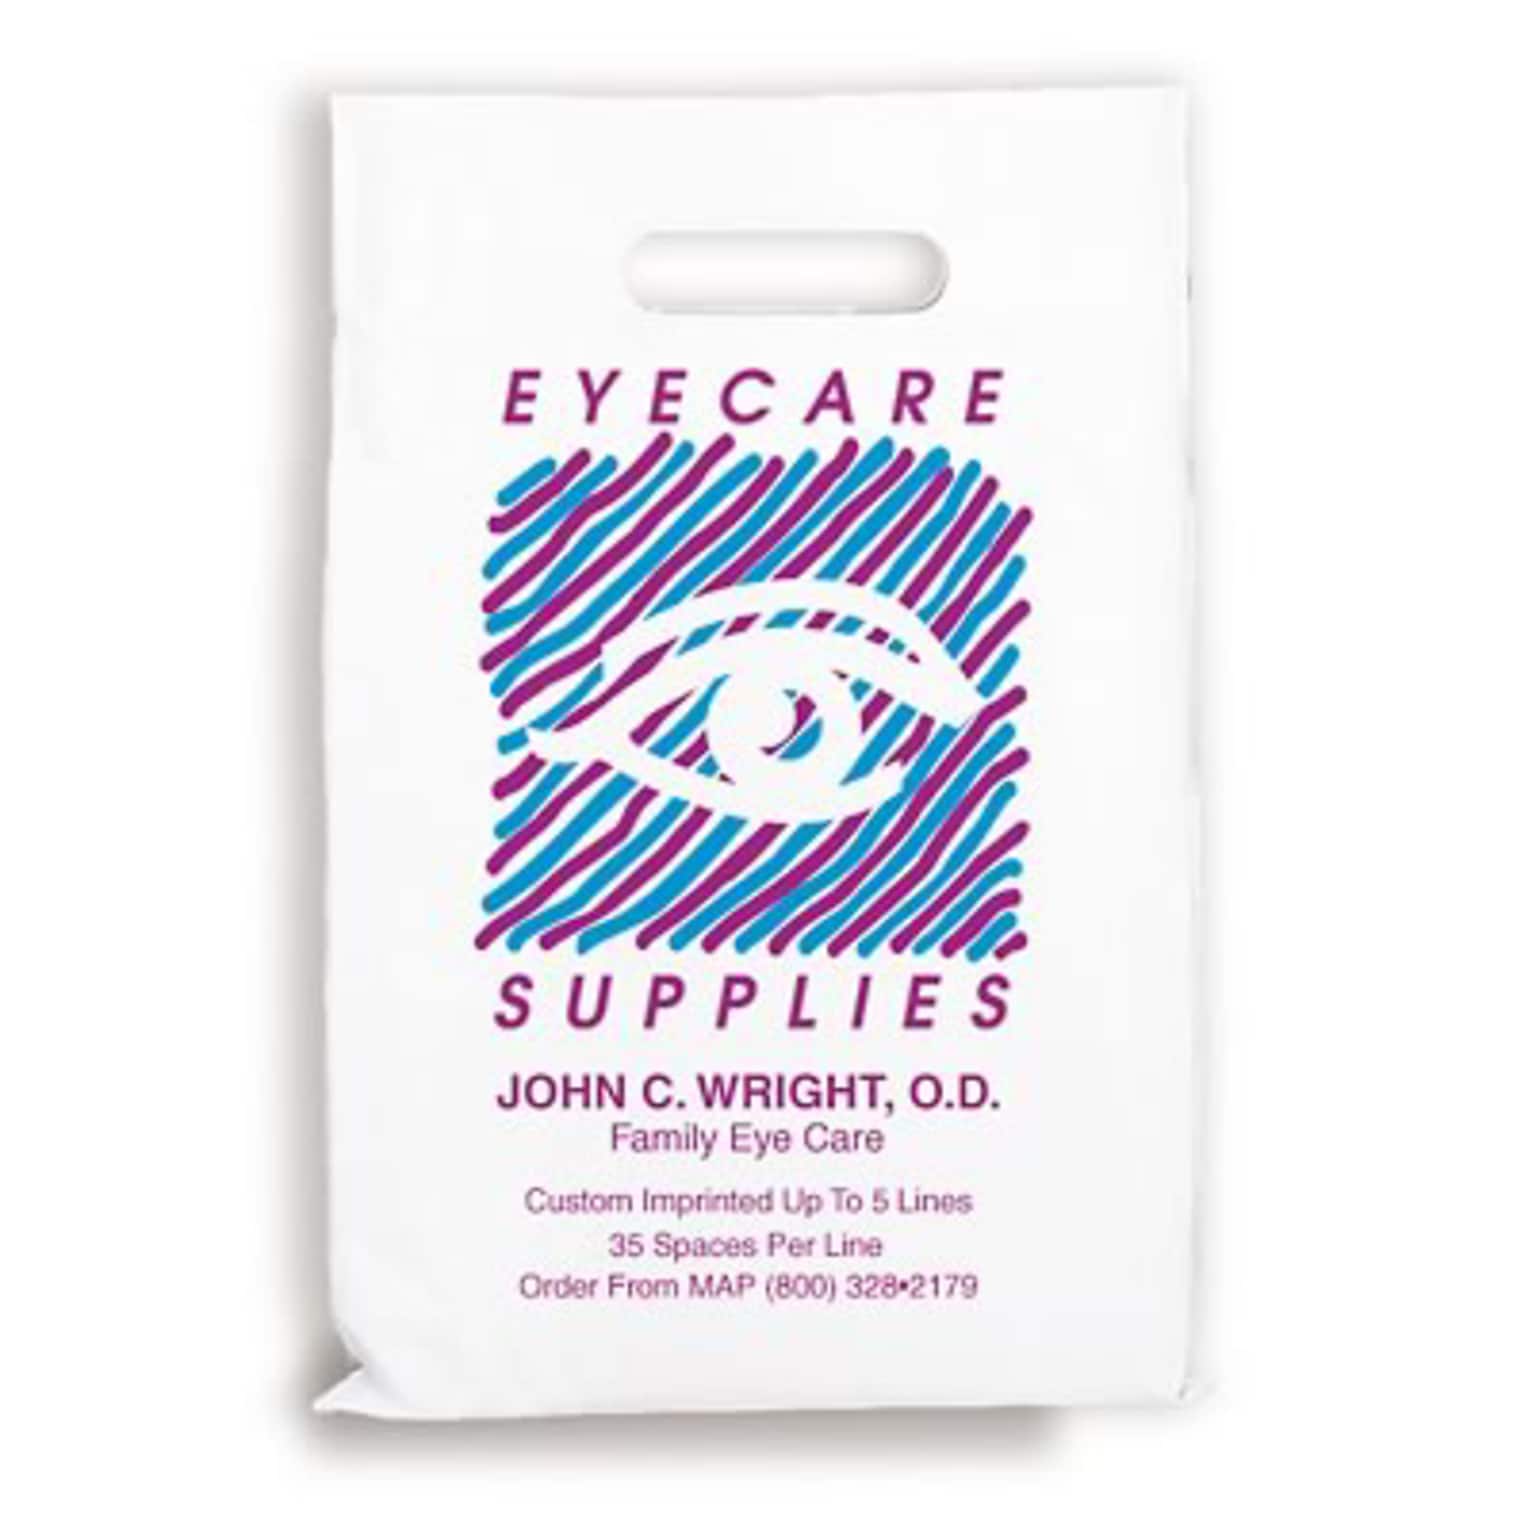 Medical Arts Press® Eye Care Personalized Jumbo 2-Color Supply Bags; 12 x 16, Eyecare Supplies w/Eye, 100 Bags, (635511)